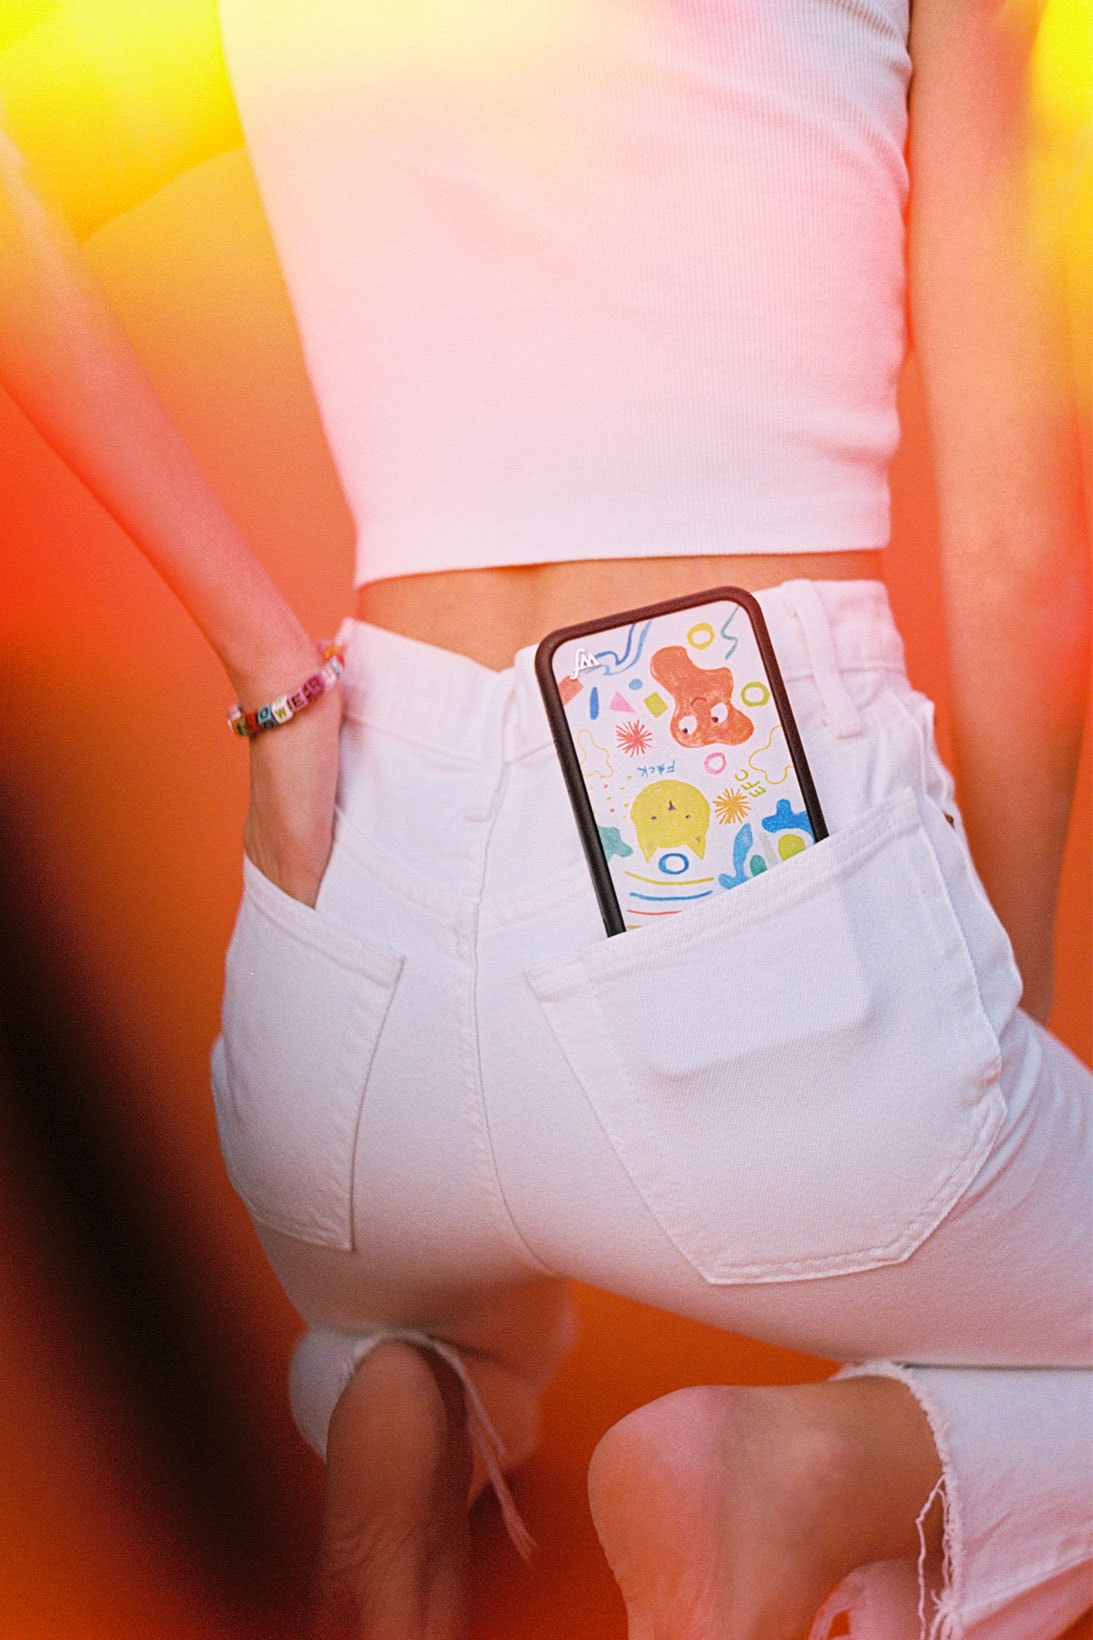 emma chamberlain wildflower iphone cases collaboration all-white jeans top